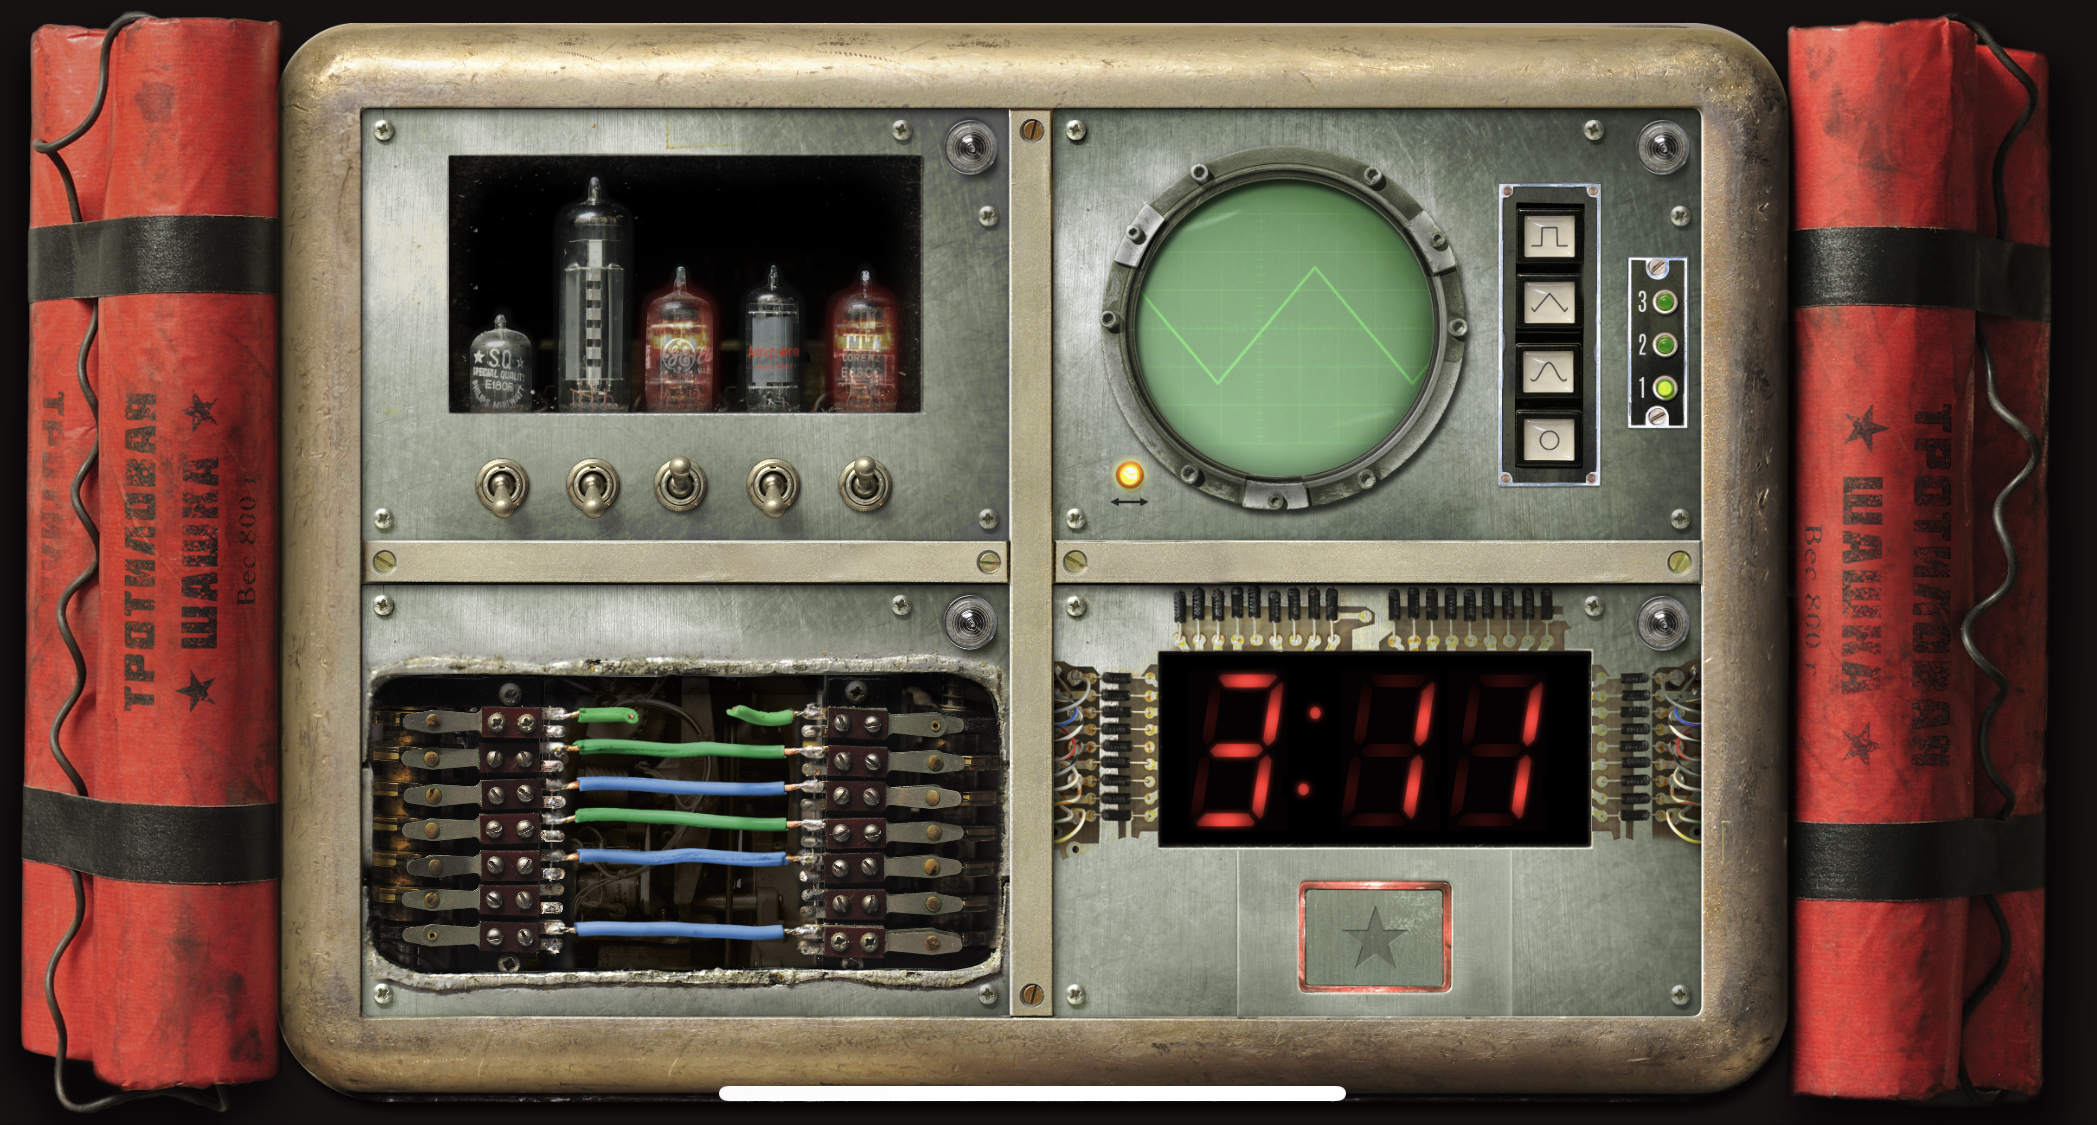 Keep Talking and Nobody Explodes - Defuse a bomb with your friends.